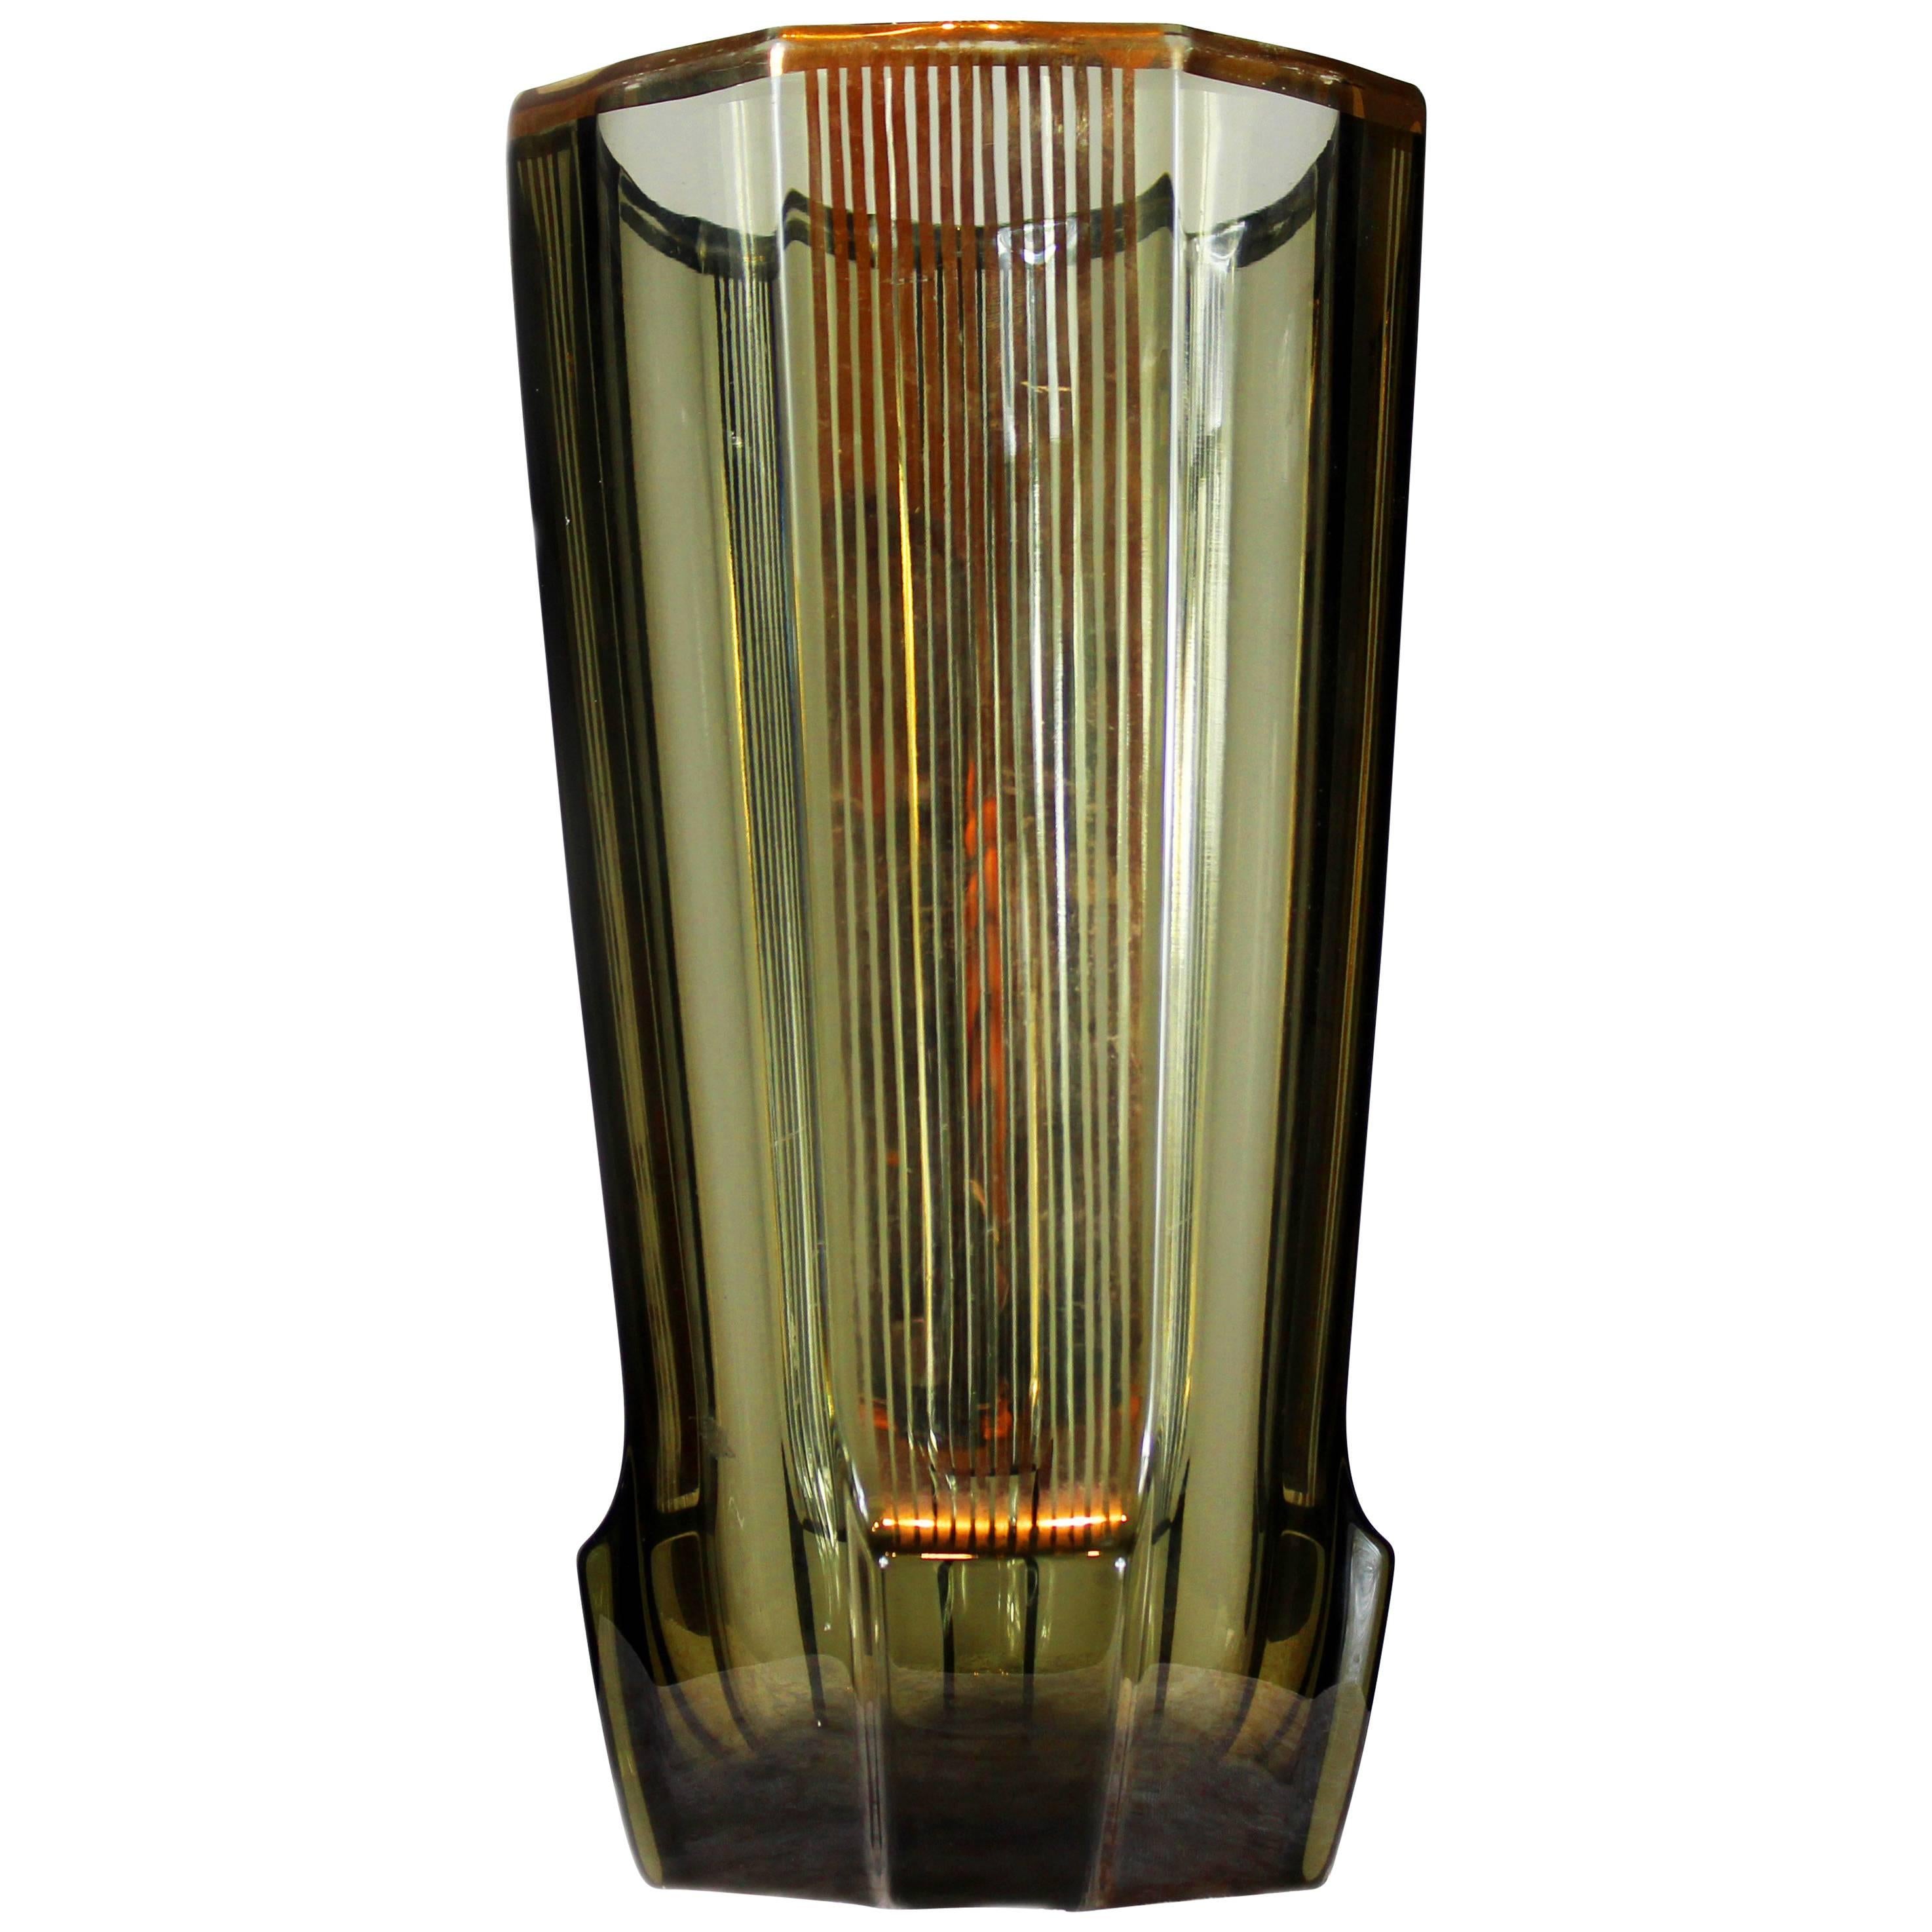 French Art Deco Vase Smoked Glass with Gold Stripes, 1940s